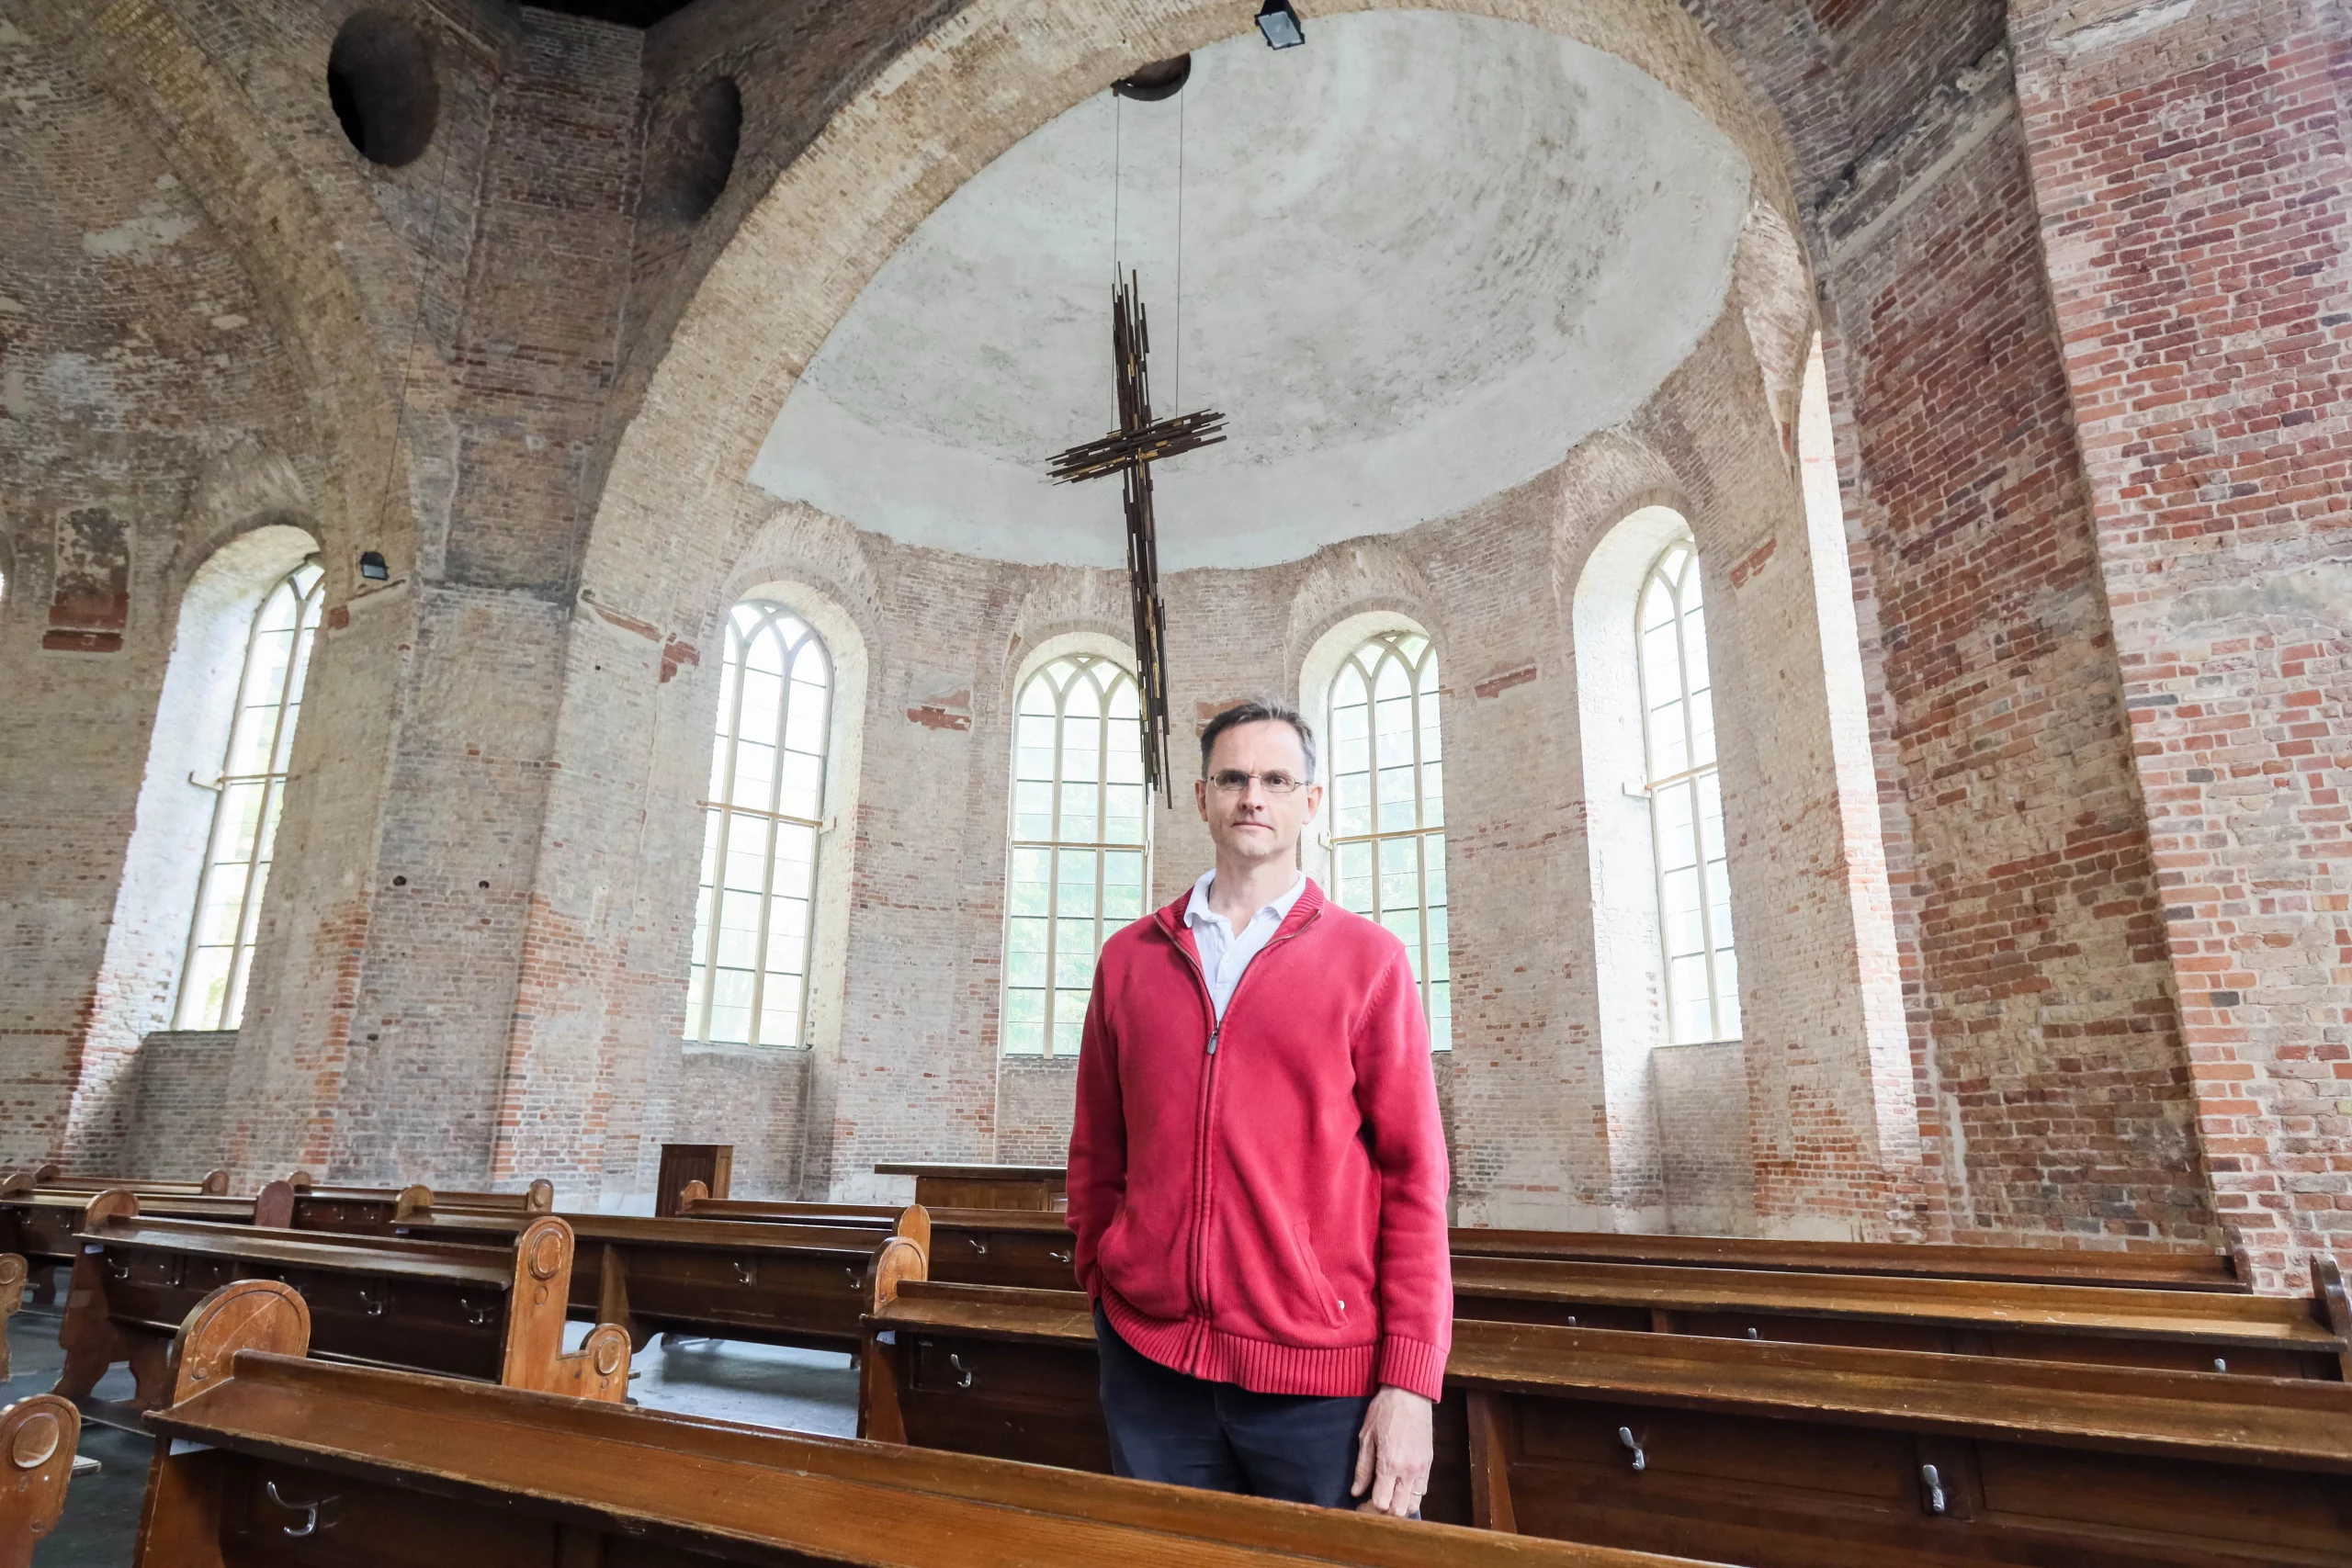 Religious freedom prevails. David Byle stands in a church in Germany after facing religious persecution in Türkiye.